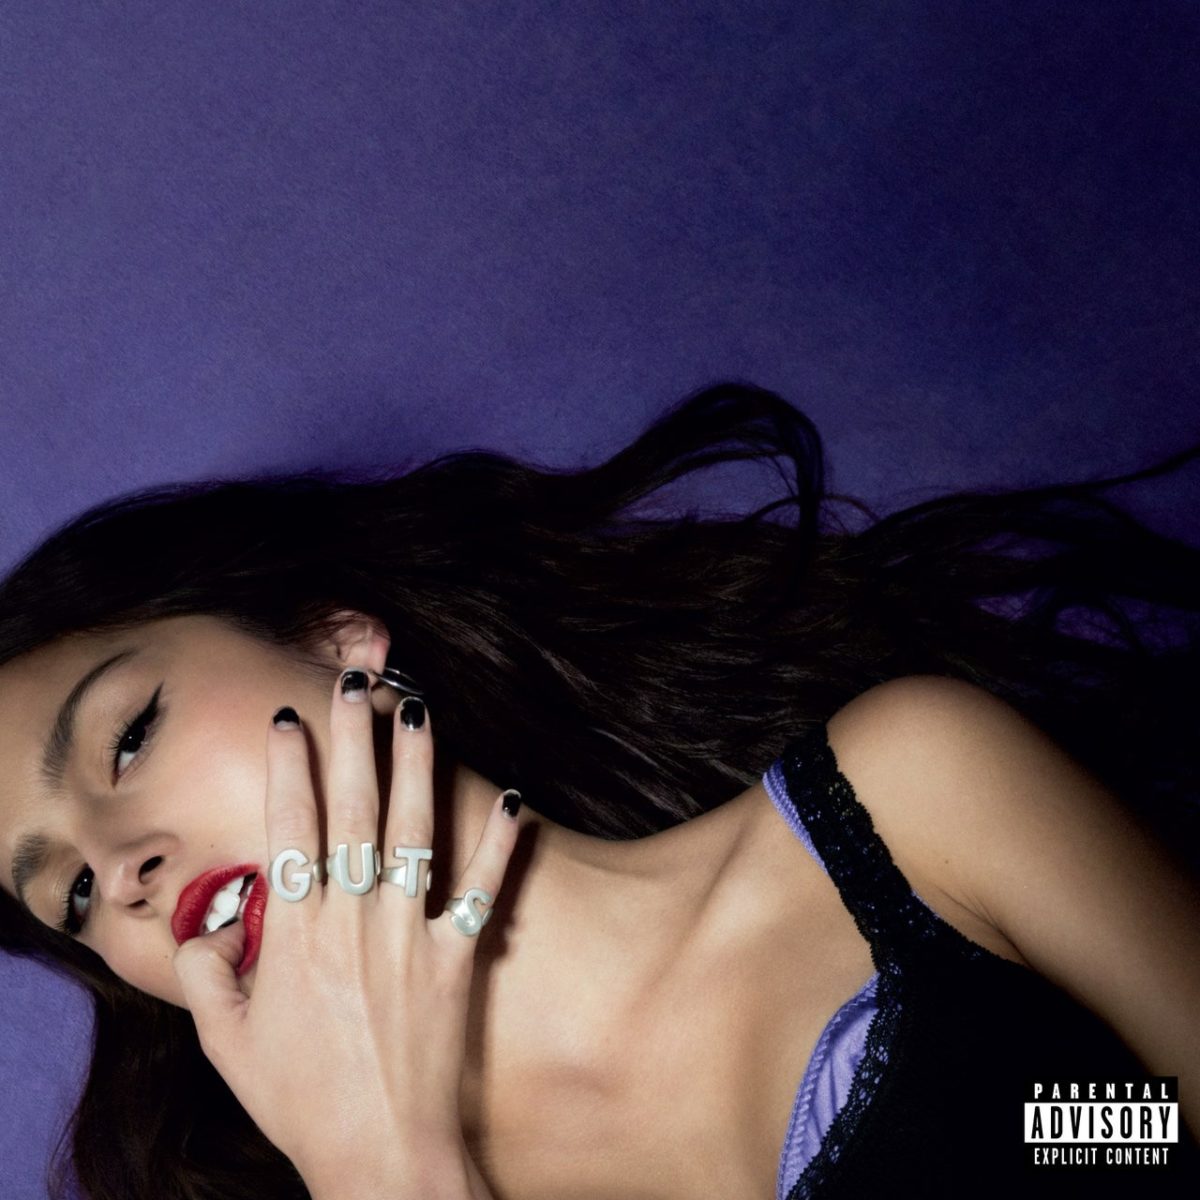 Olivia Rodrigo releases her highly anticipated second album, GUTS (2023), two years after her debuting critically acclaimed album SOUR.